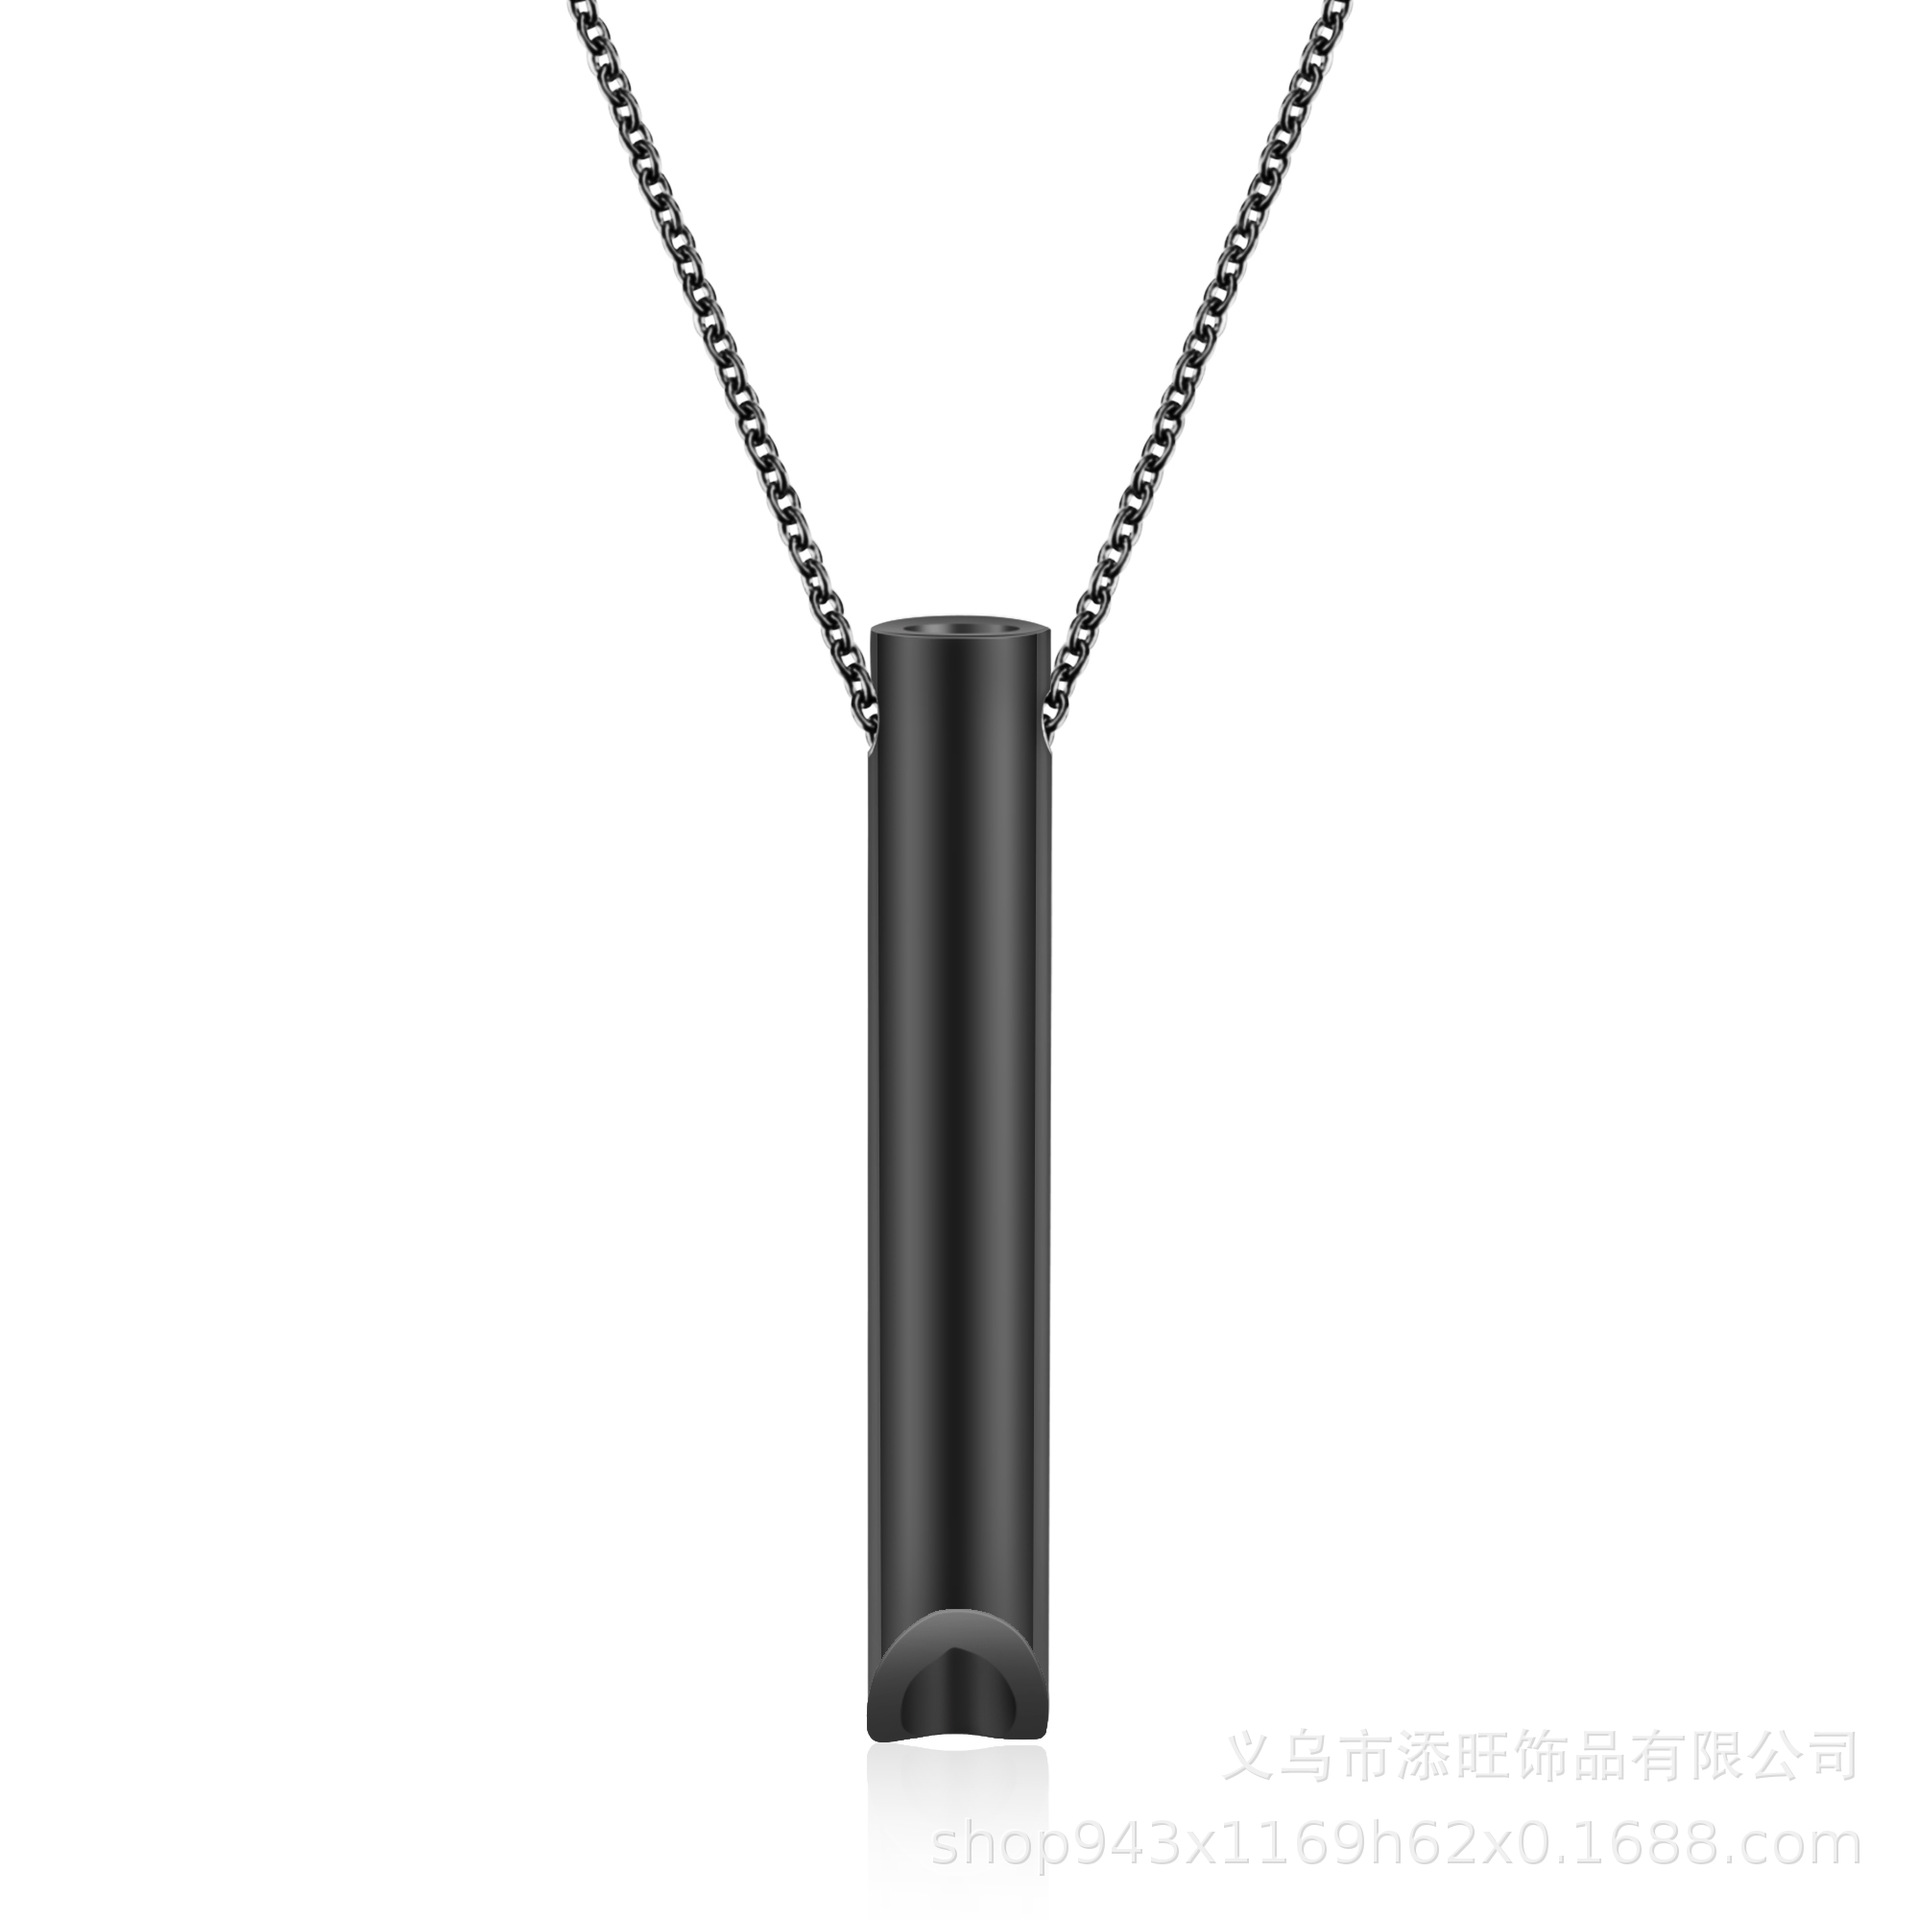 Cross-Border Personalized Three-Dimensional Shift Decompression Respirator Necklace Stainless Steel Adjustable Breathing Whistle Necklace Ornament